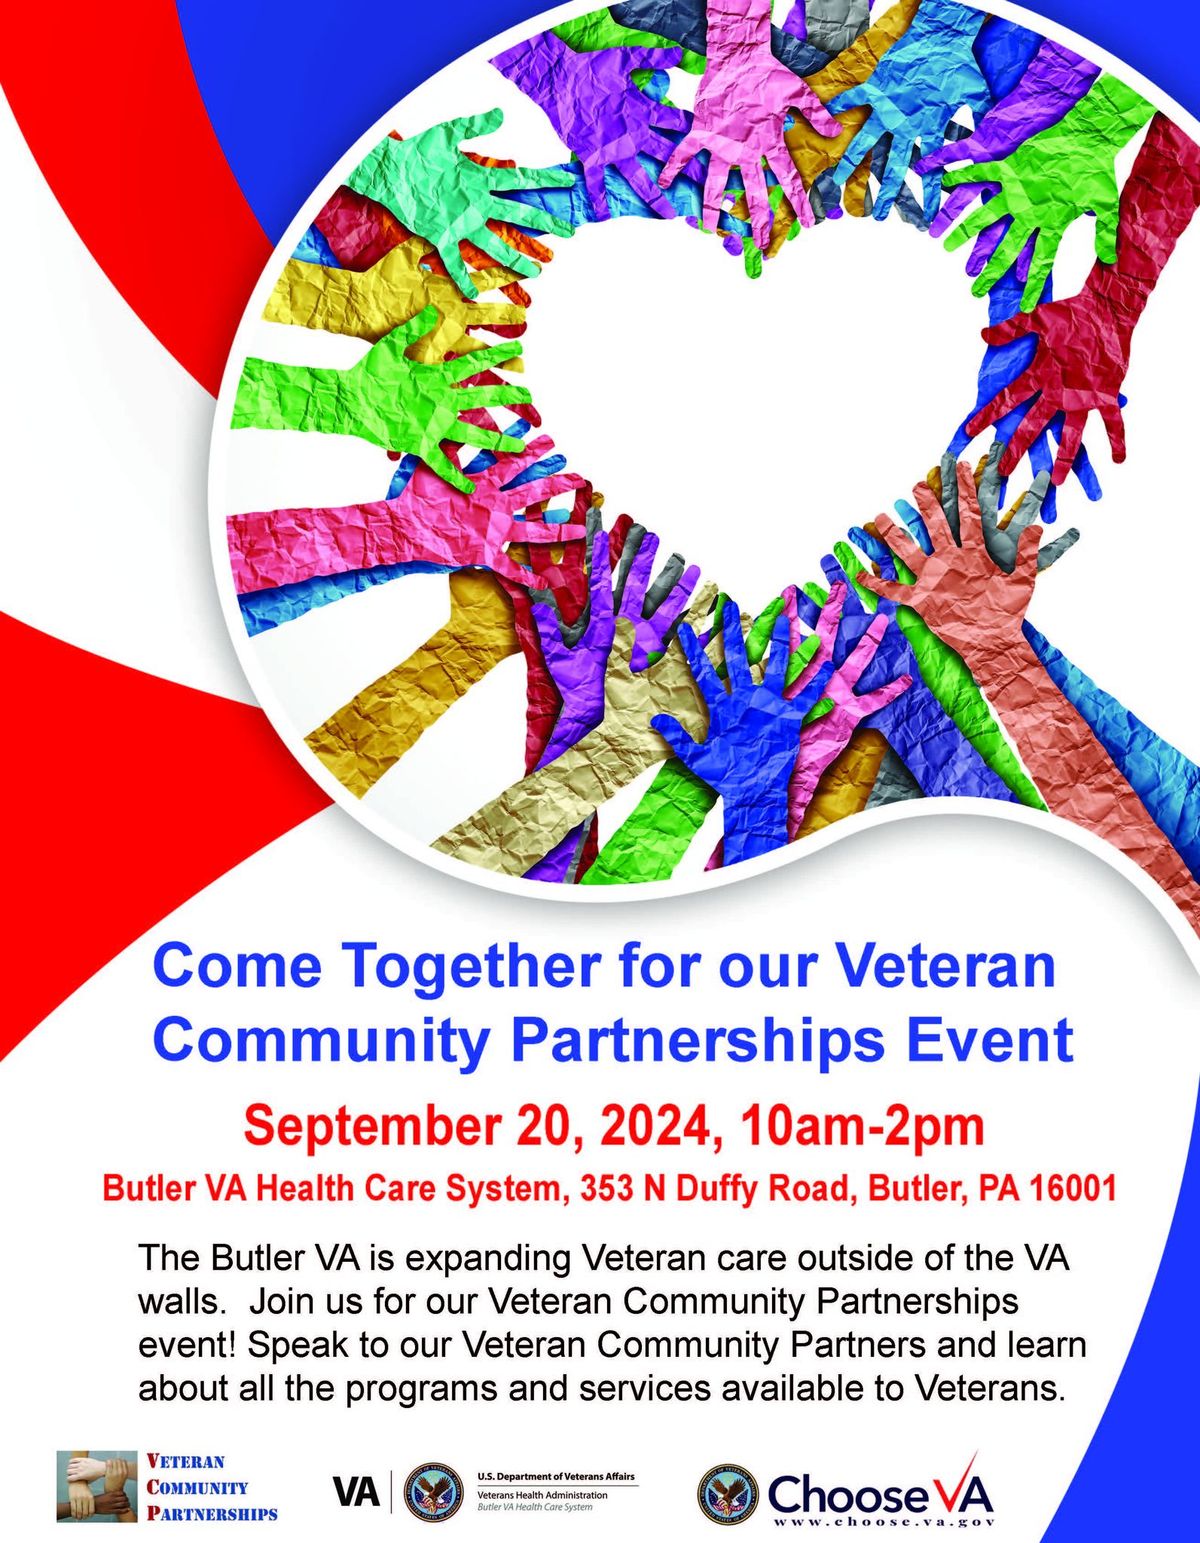 Come Together for our Veteran Community Partnerships Event